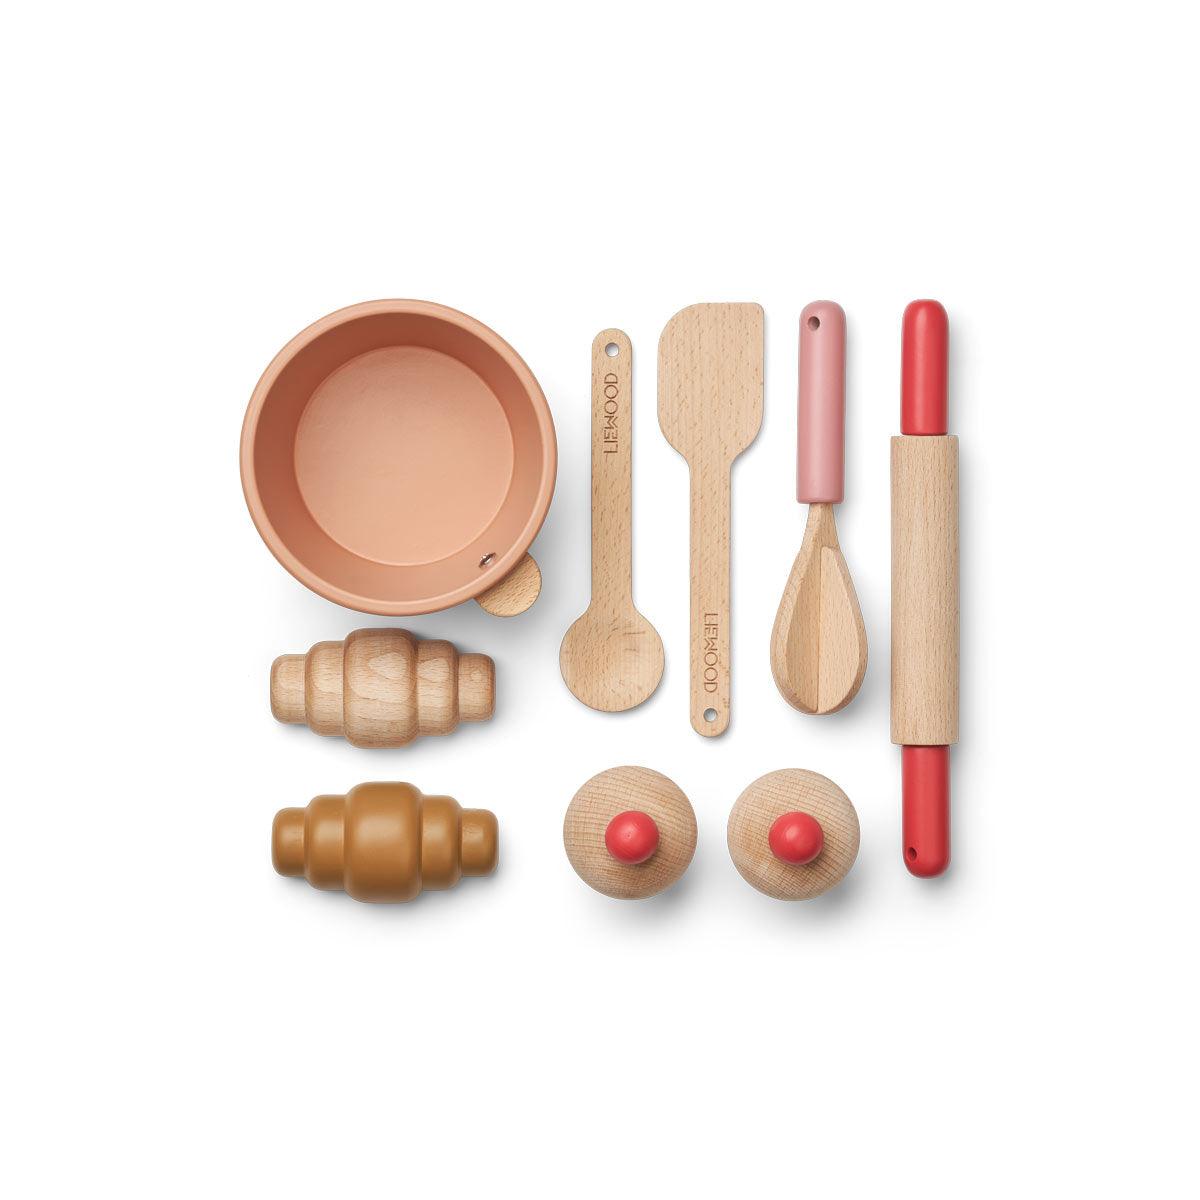 The Liewood Lisbeth Baking Play Set is a great role play christmas gift for your little ones to use their imagination stocked at Nottingham’s Children’s Independent Store.